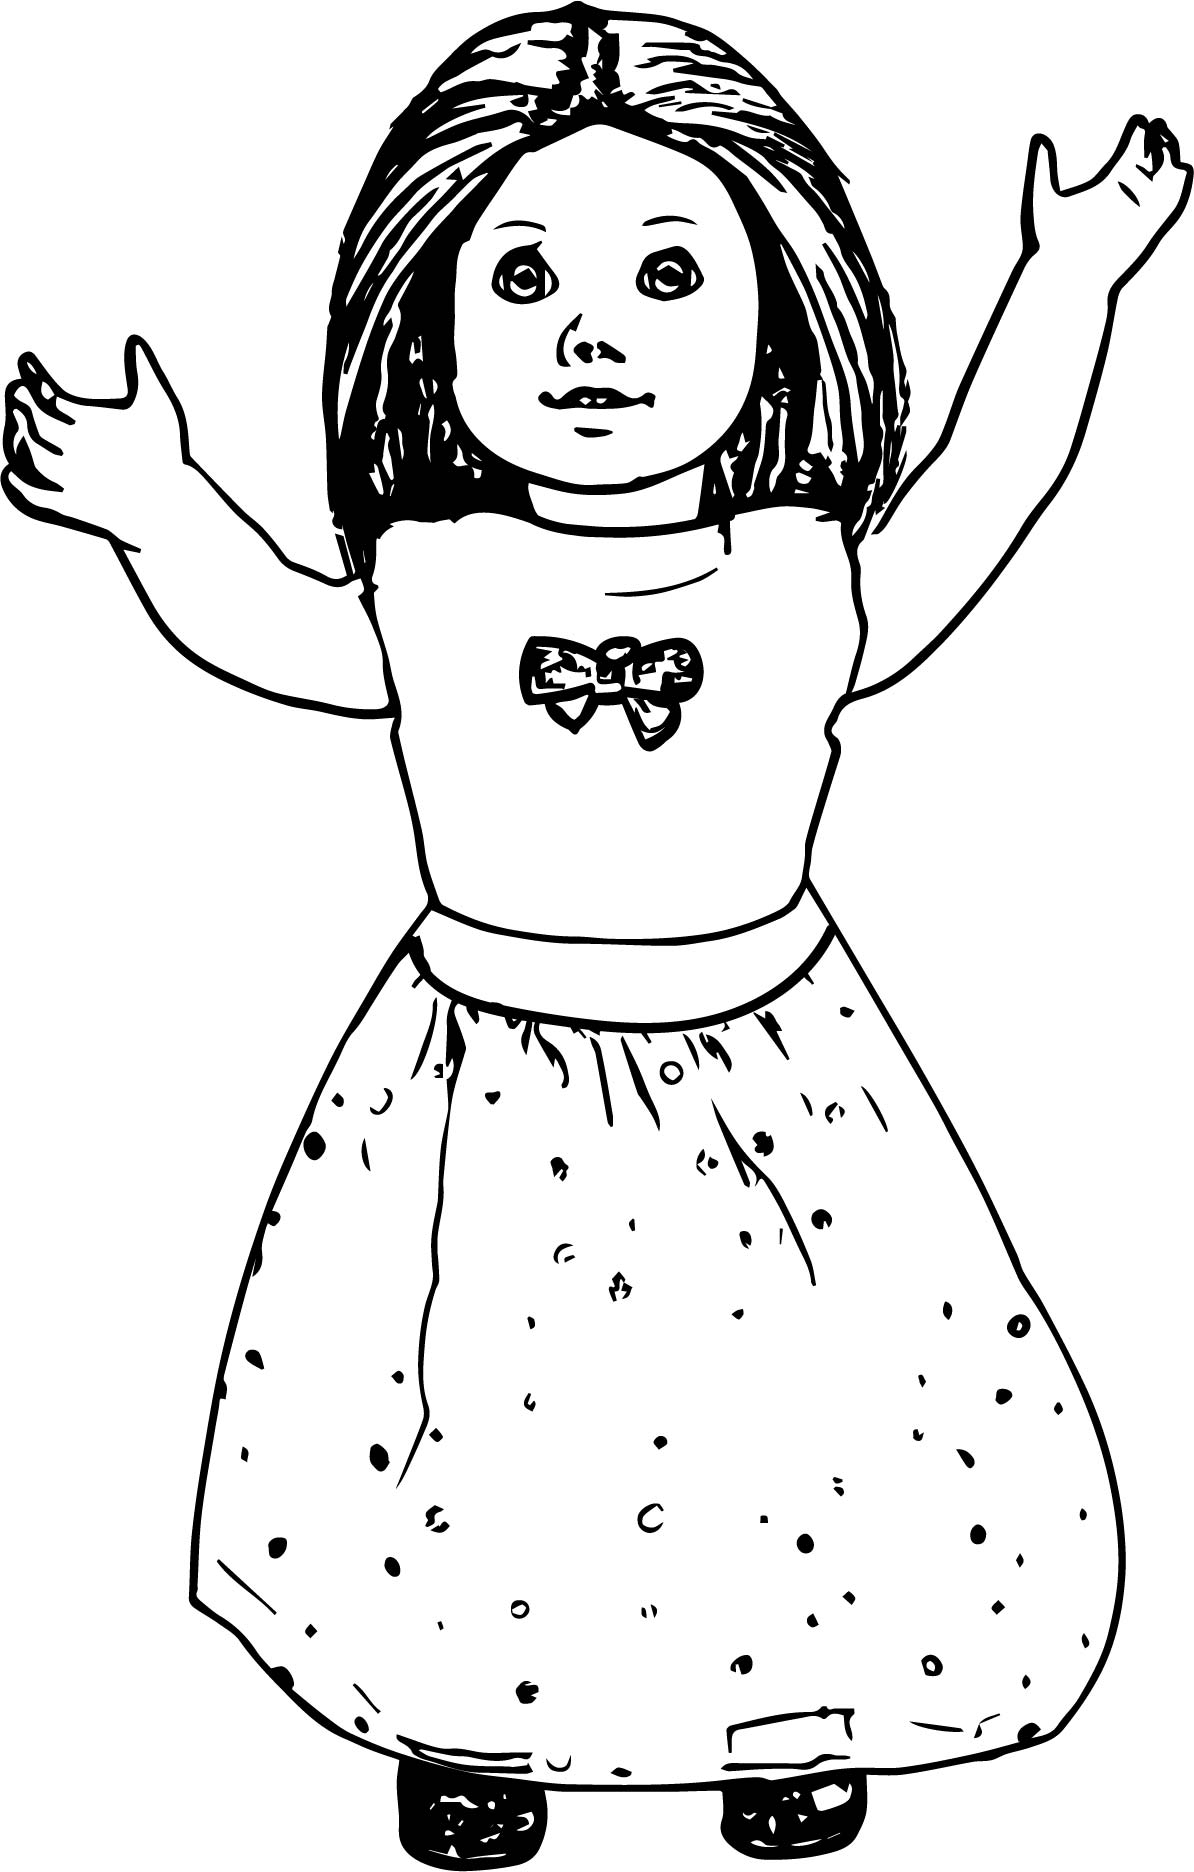 American Girl Coloring Pages - Best Coloring Pages For Kids  Coloring  pages for girls, American girl doll pictures, Dinosaur coloring pages